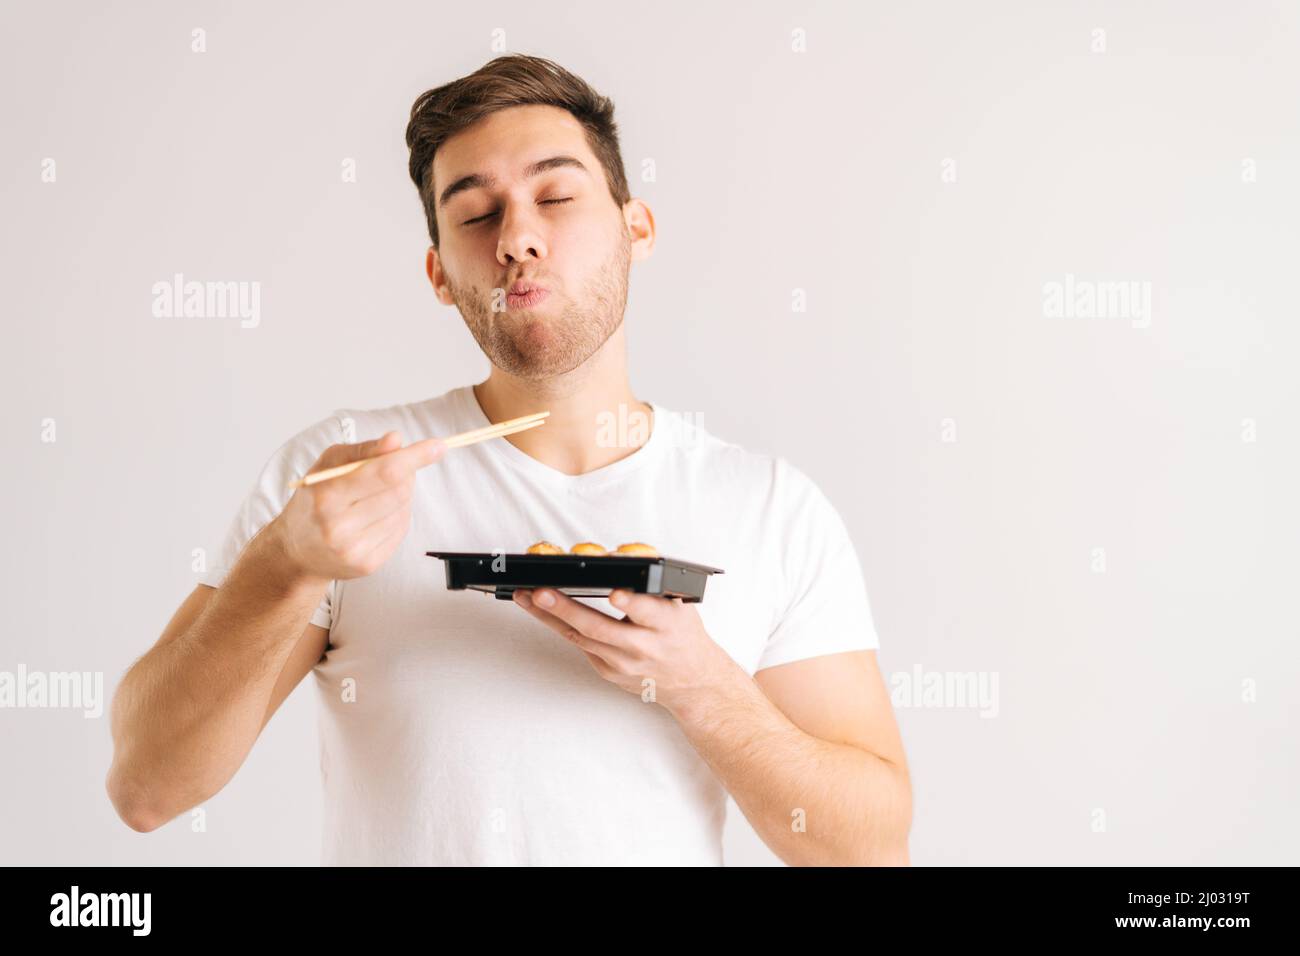 Portrait of handsome young man with enjoying eating fresh tasty sushi rolls with chopsticks on white isolated background. Stock Photo